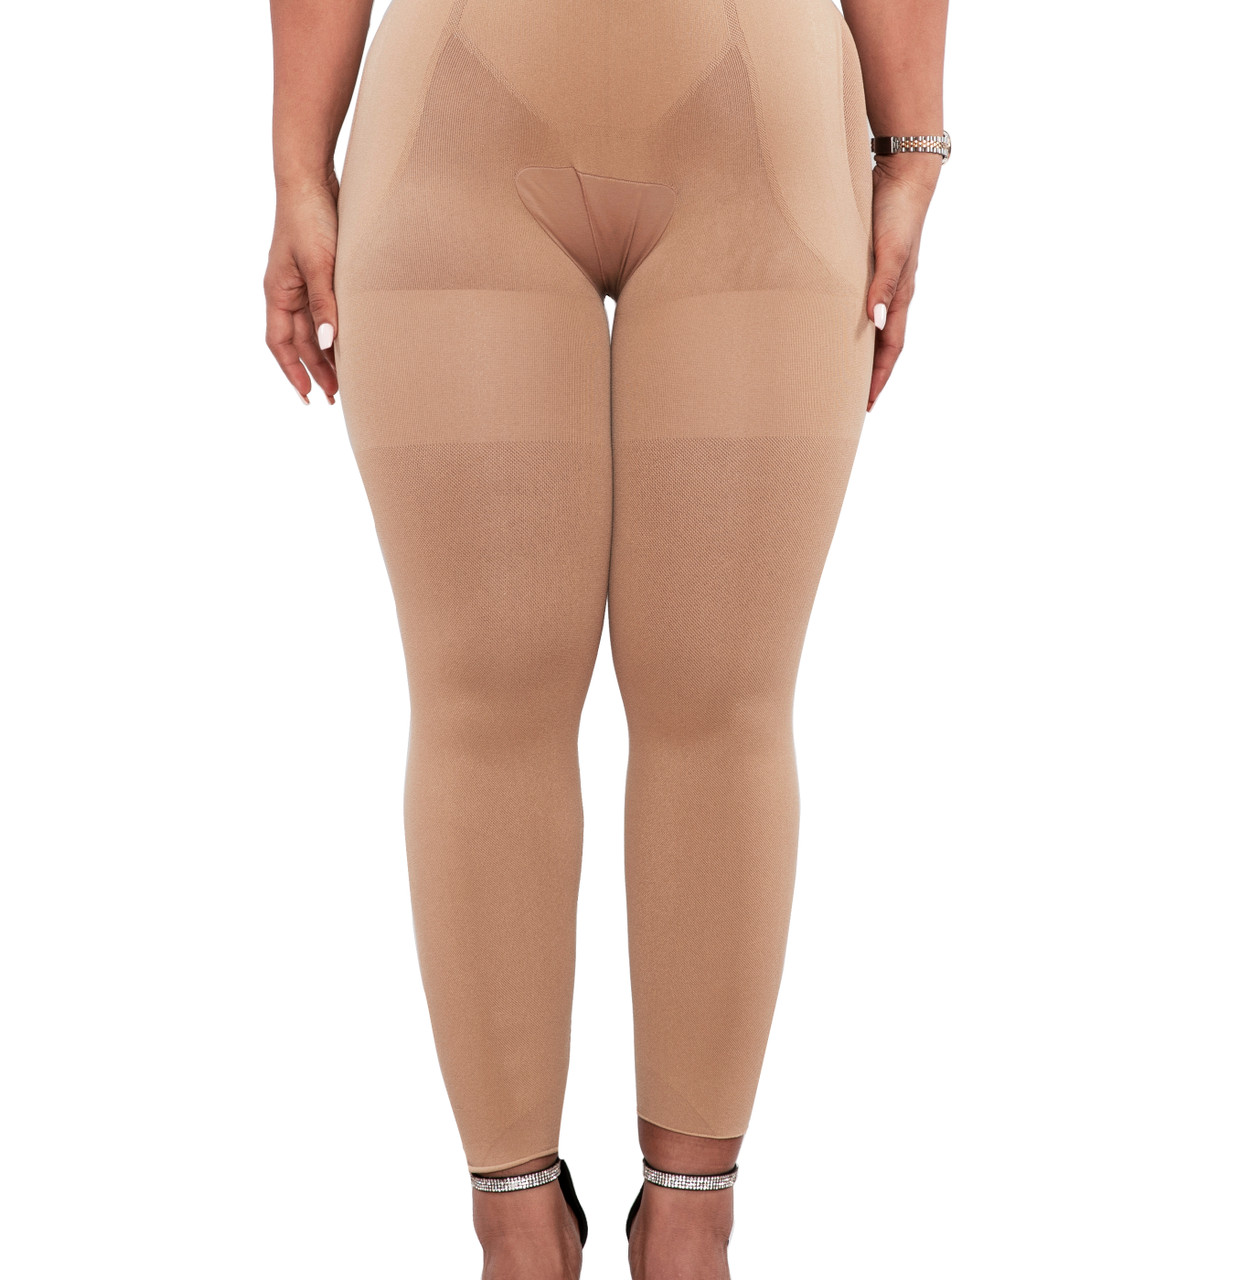 RUBII BODY SHAPER SERIES SIZE XS COLOR NUDE No BR6447B. REG $ 58.99 - Helia  Beer Co